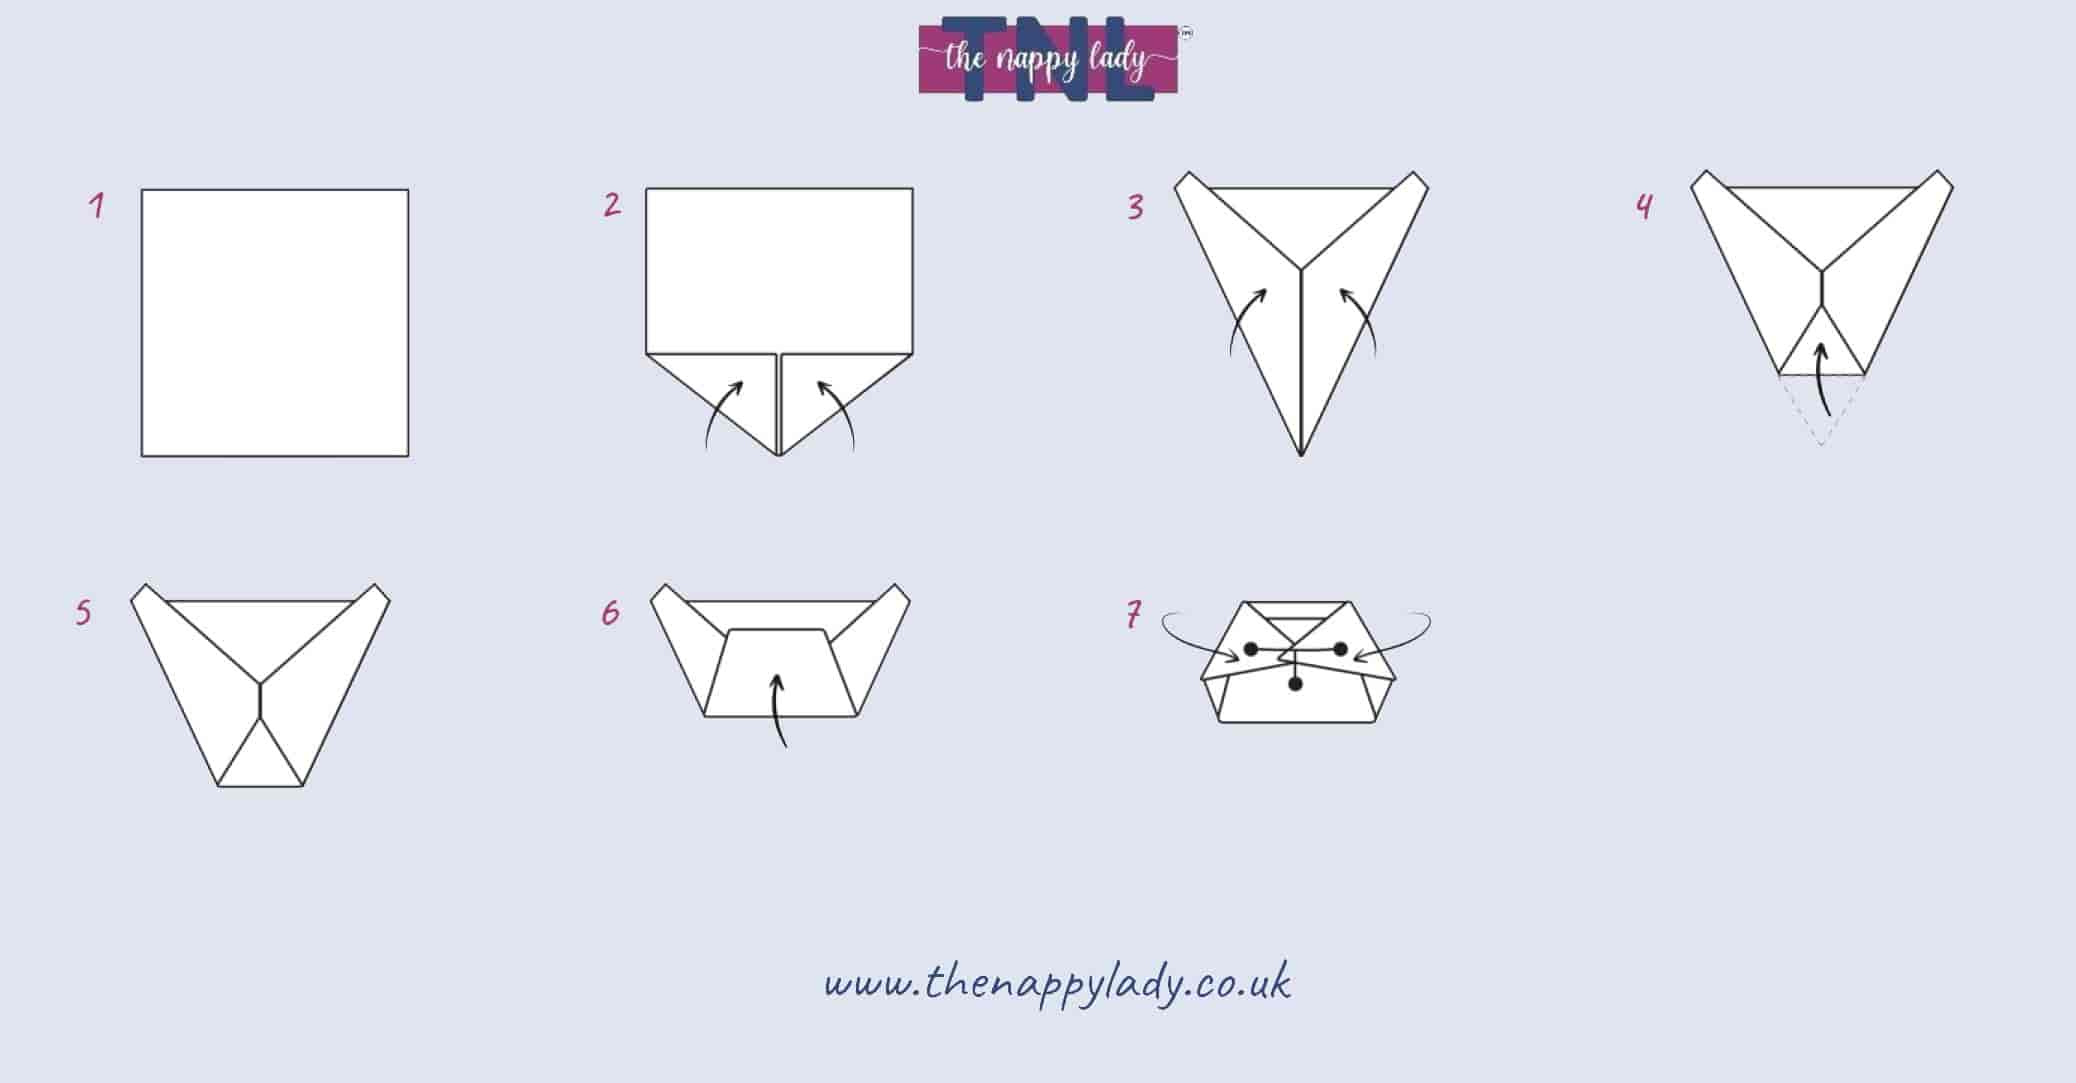 folding guide for the concorde terry nappy fold